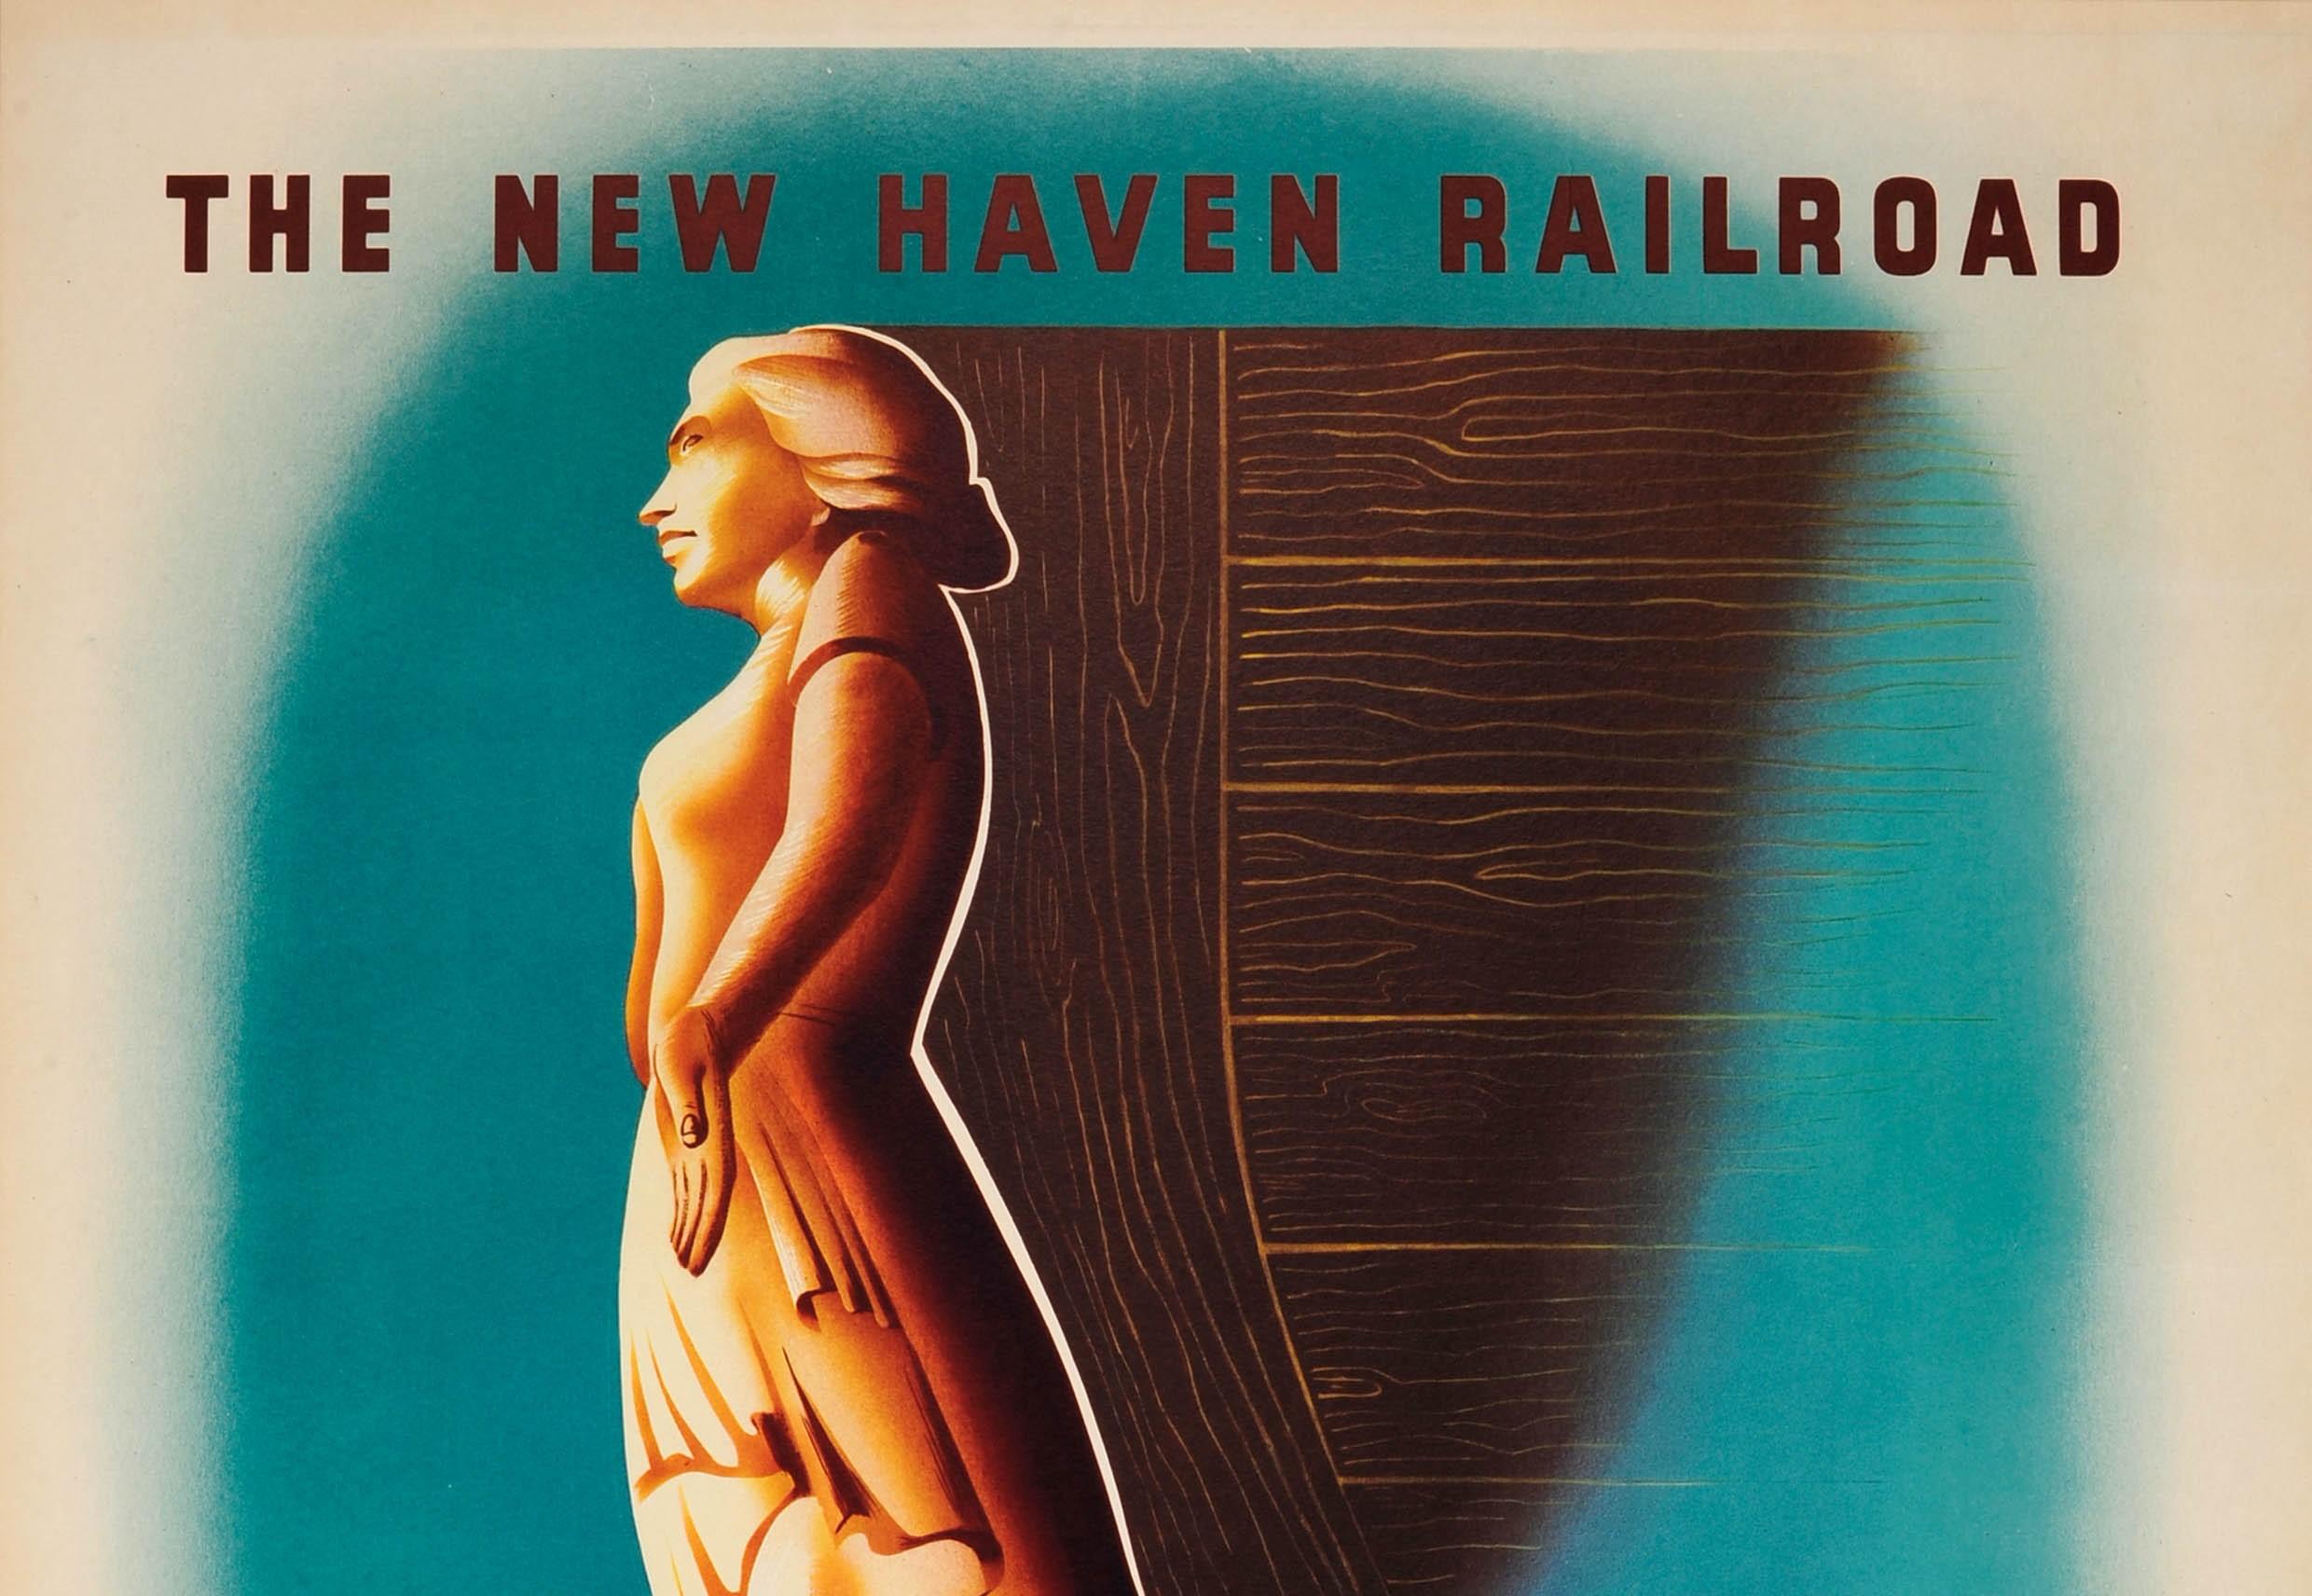 Original Vintage Travel Poster For Martha's Vineyard By The New Haven Railroad - Print by Ben Nason